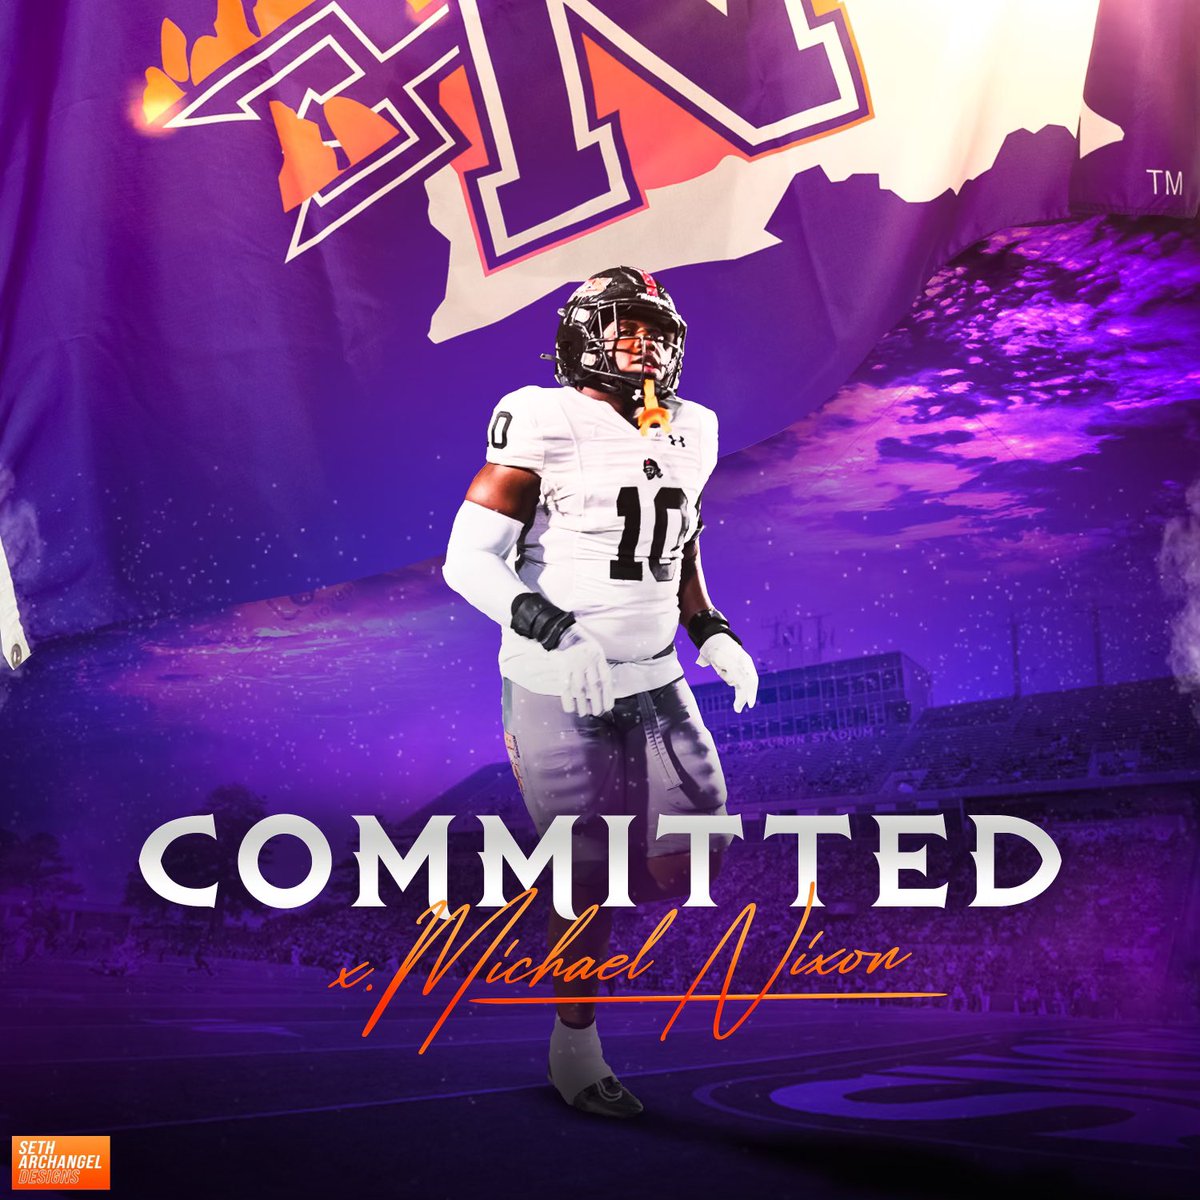 After a great visit and talks with @BlaineMcCorkle @TheCoach_G @CoachNBJoseph I’m proud to announce my commitment to play at @NSUDemonsFB All glory to Jesus Christ🙏🏾 @RecruitHoover @AL7AFootball @TDARecruiting @jwindon35 @CoachL__ @jhamlin88 @Coach_Reeves21 @AL_Recruiting